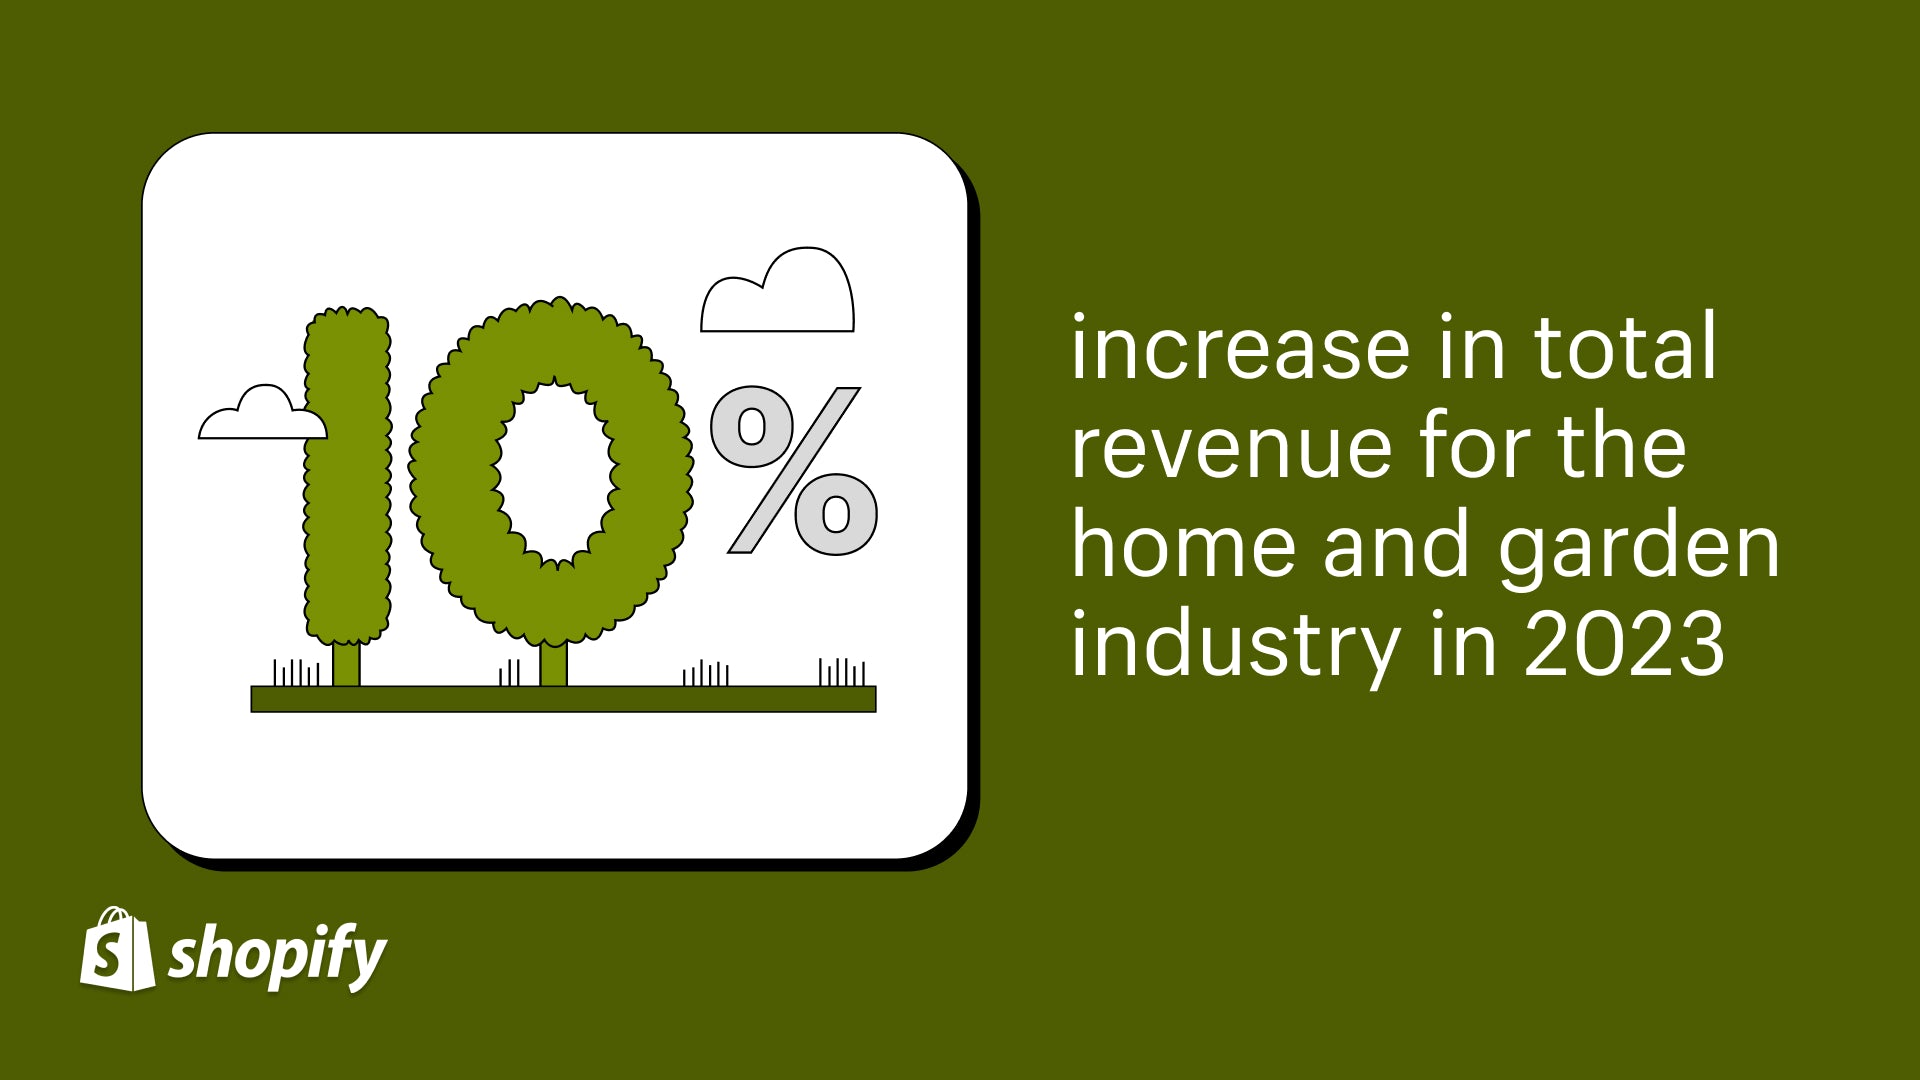 Green backgrond with a cartoon image of 10% on the left-hand side and on the right-hand side there is a fact that reads, 'increase in total revenue for the home and garden industry in 2023.'